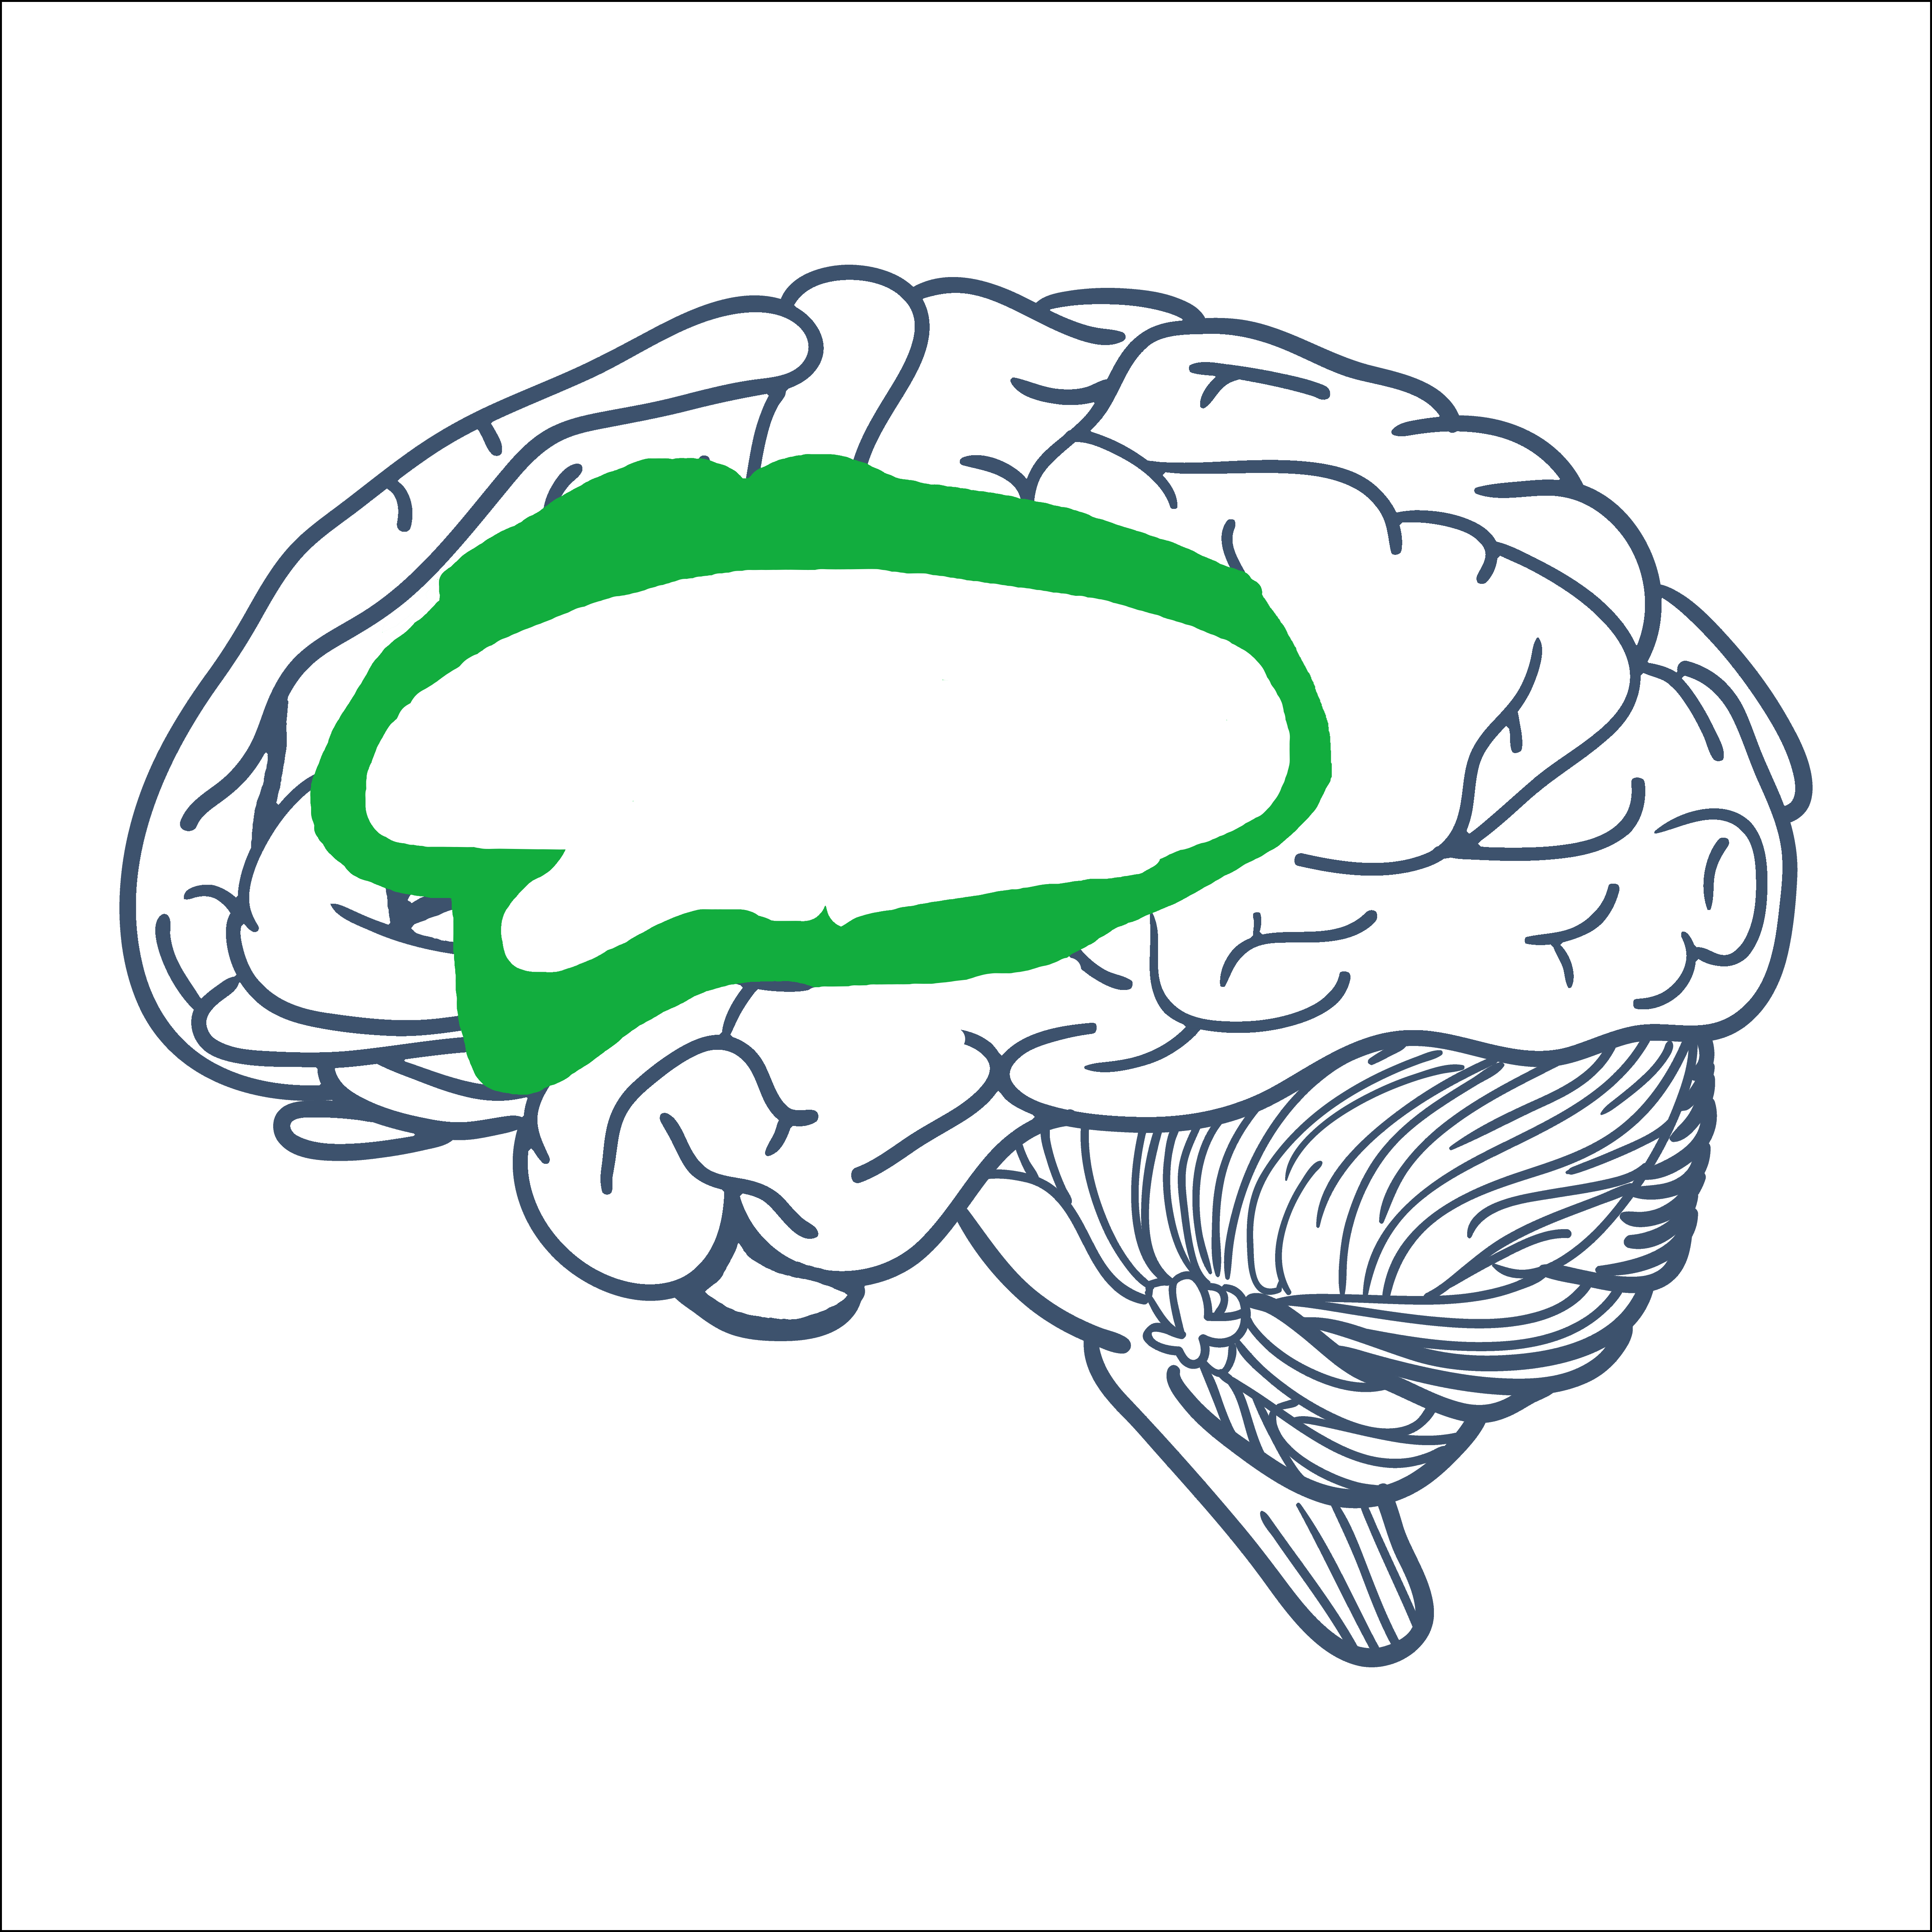 part of brain in green circle that relates to the affective network